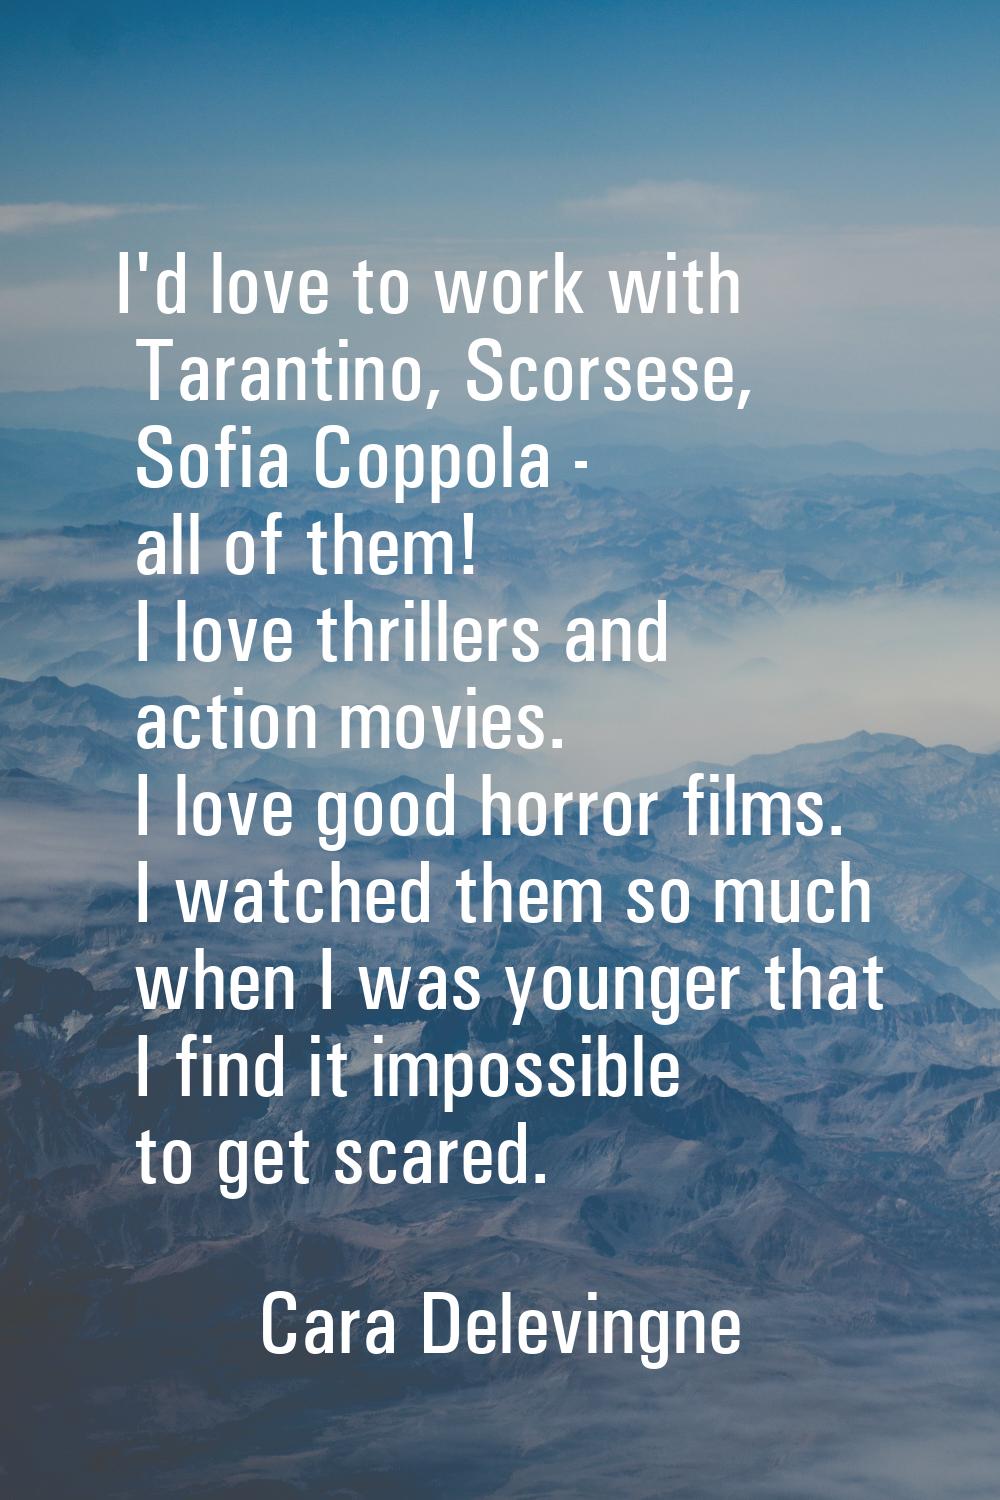 I'd love to work with Tarantino, Scorsese, Sofia Coppola - all of them! I love thrillers and action